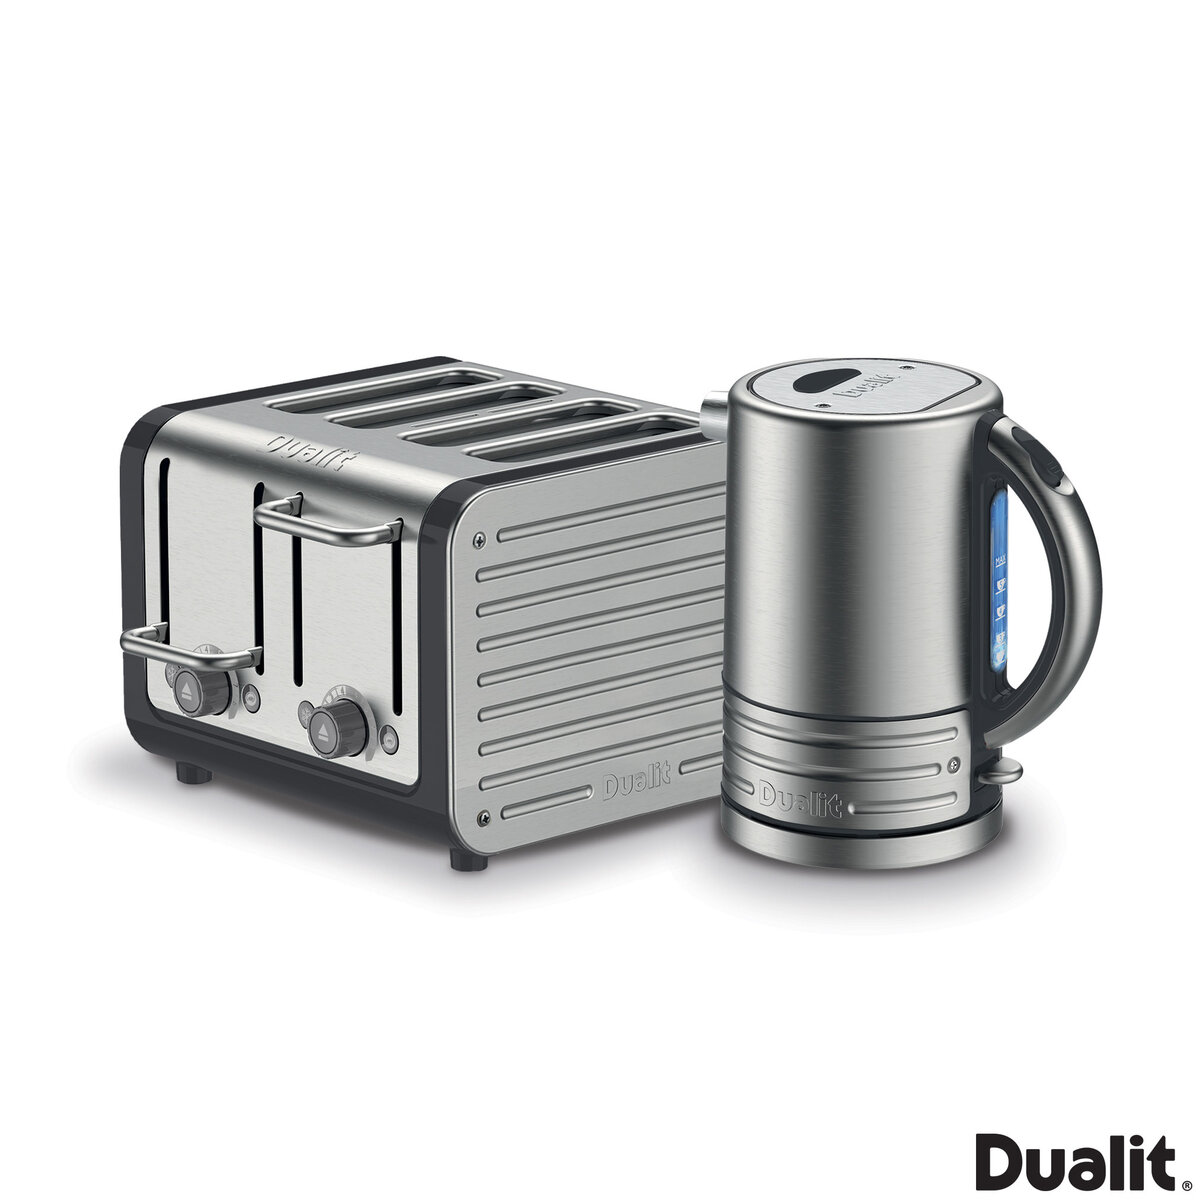 Dualit Architect 1.5L Kettle & 4 Slot Toaster Set in Midn...